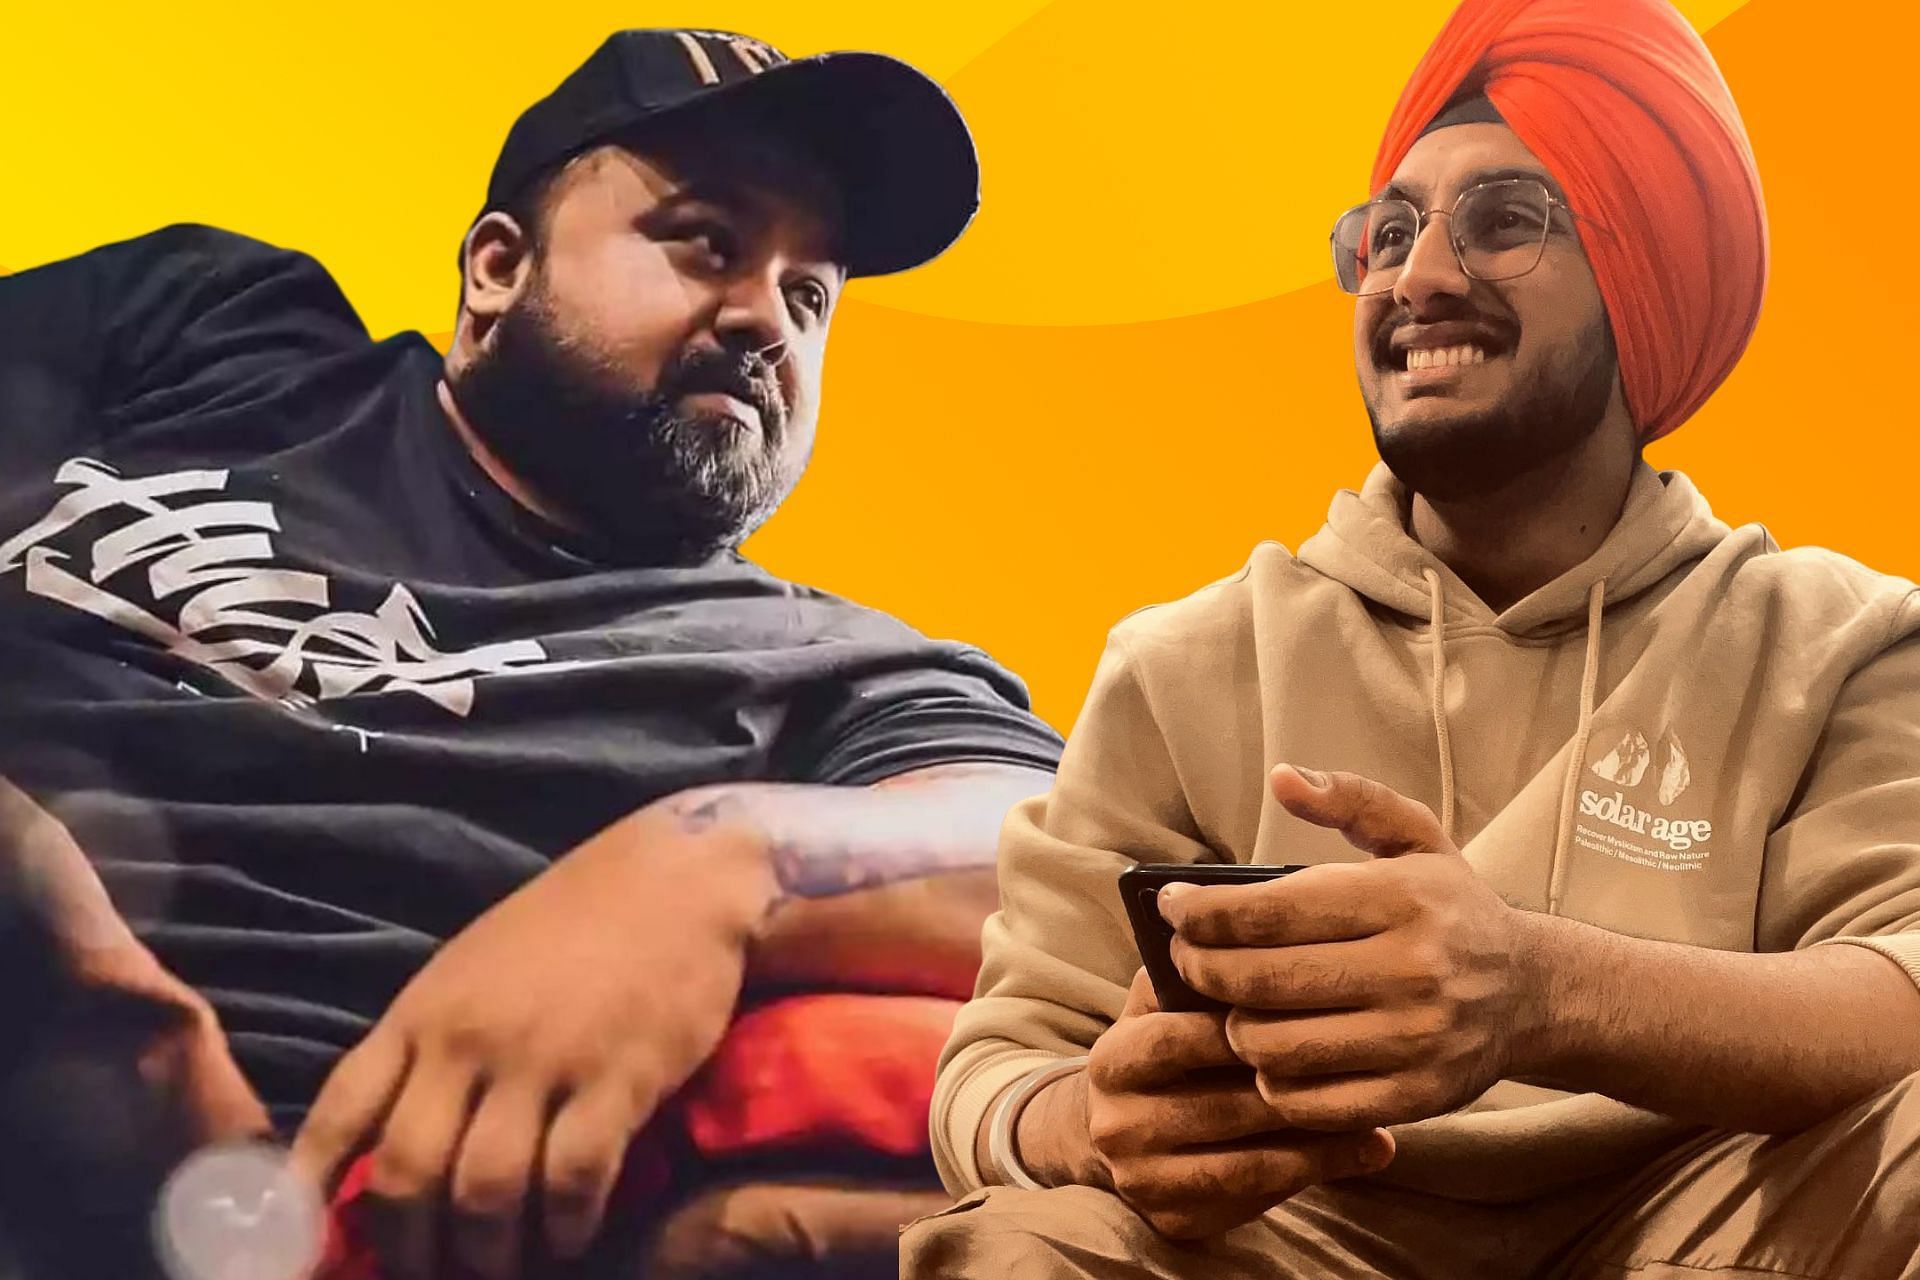 BGMI personalities 8bit Goldy and Sardarji are ecstatic about S8UL